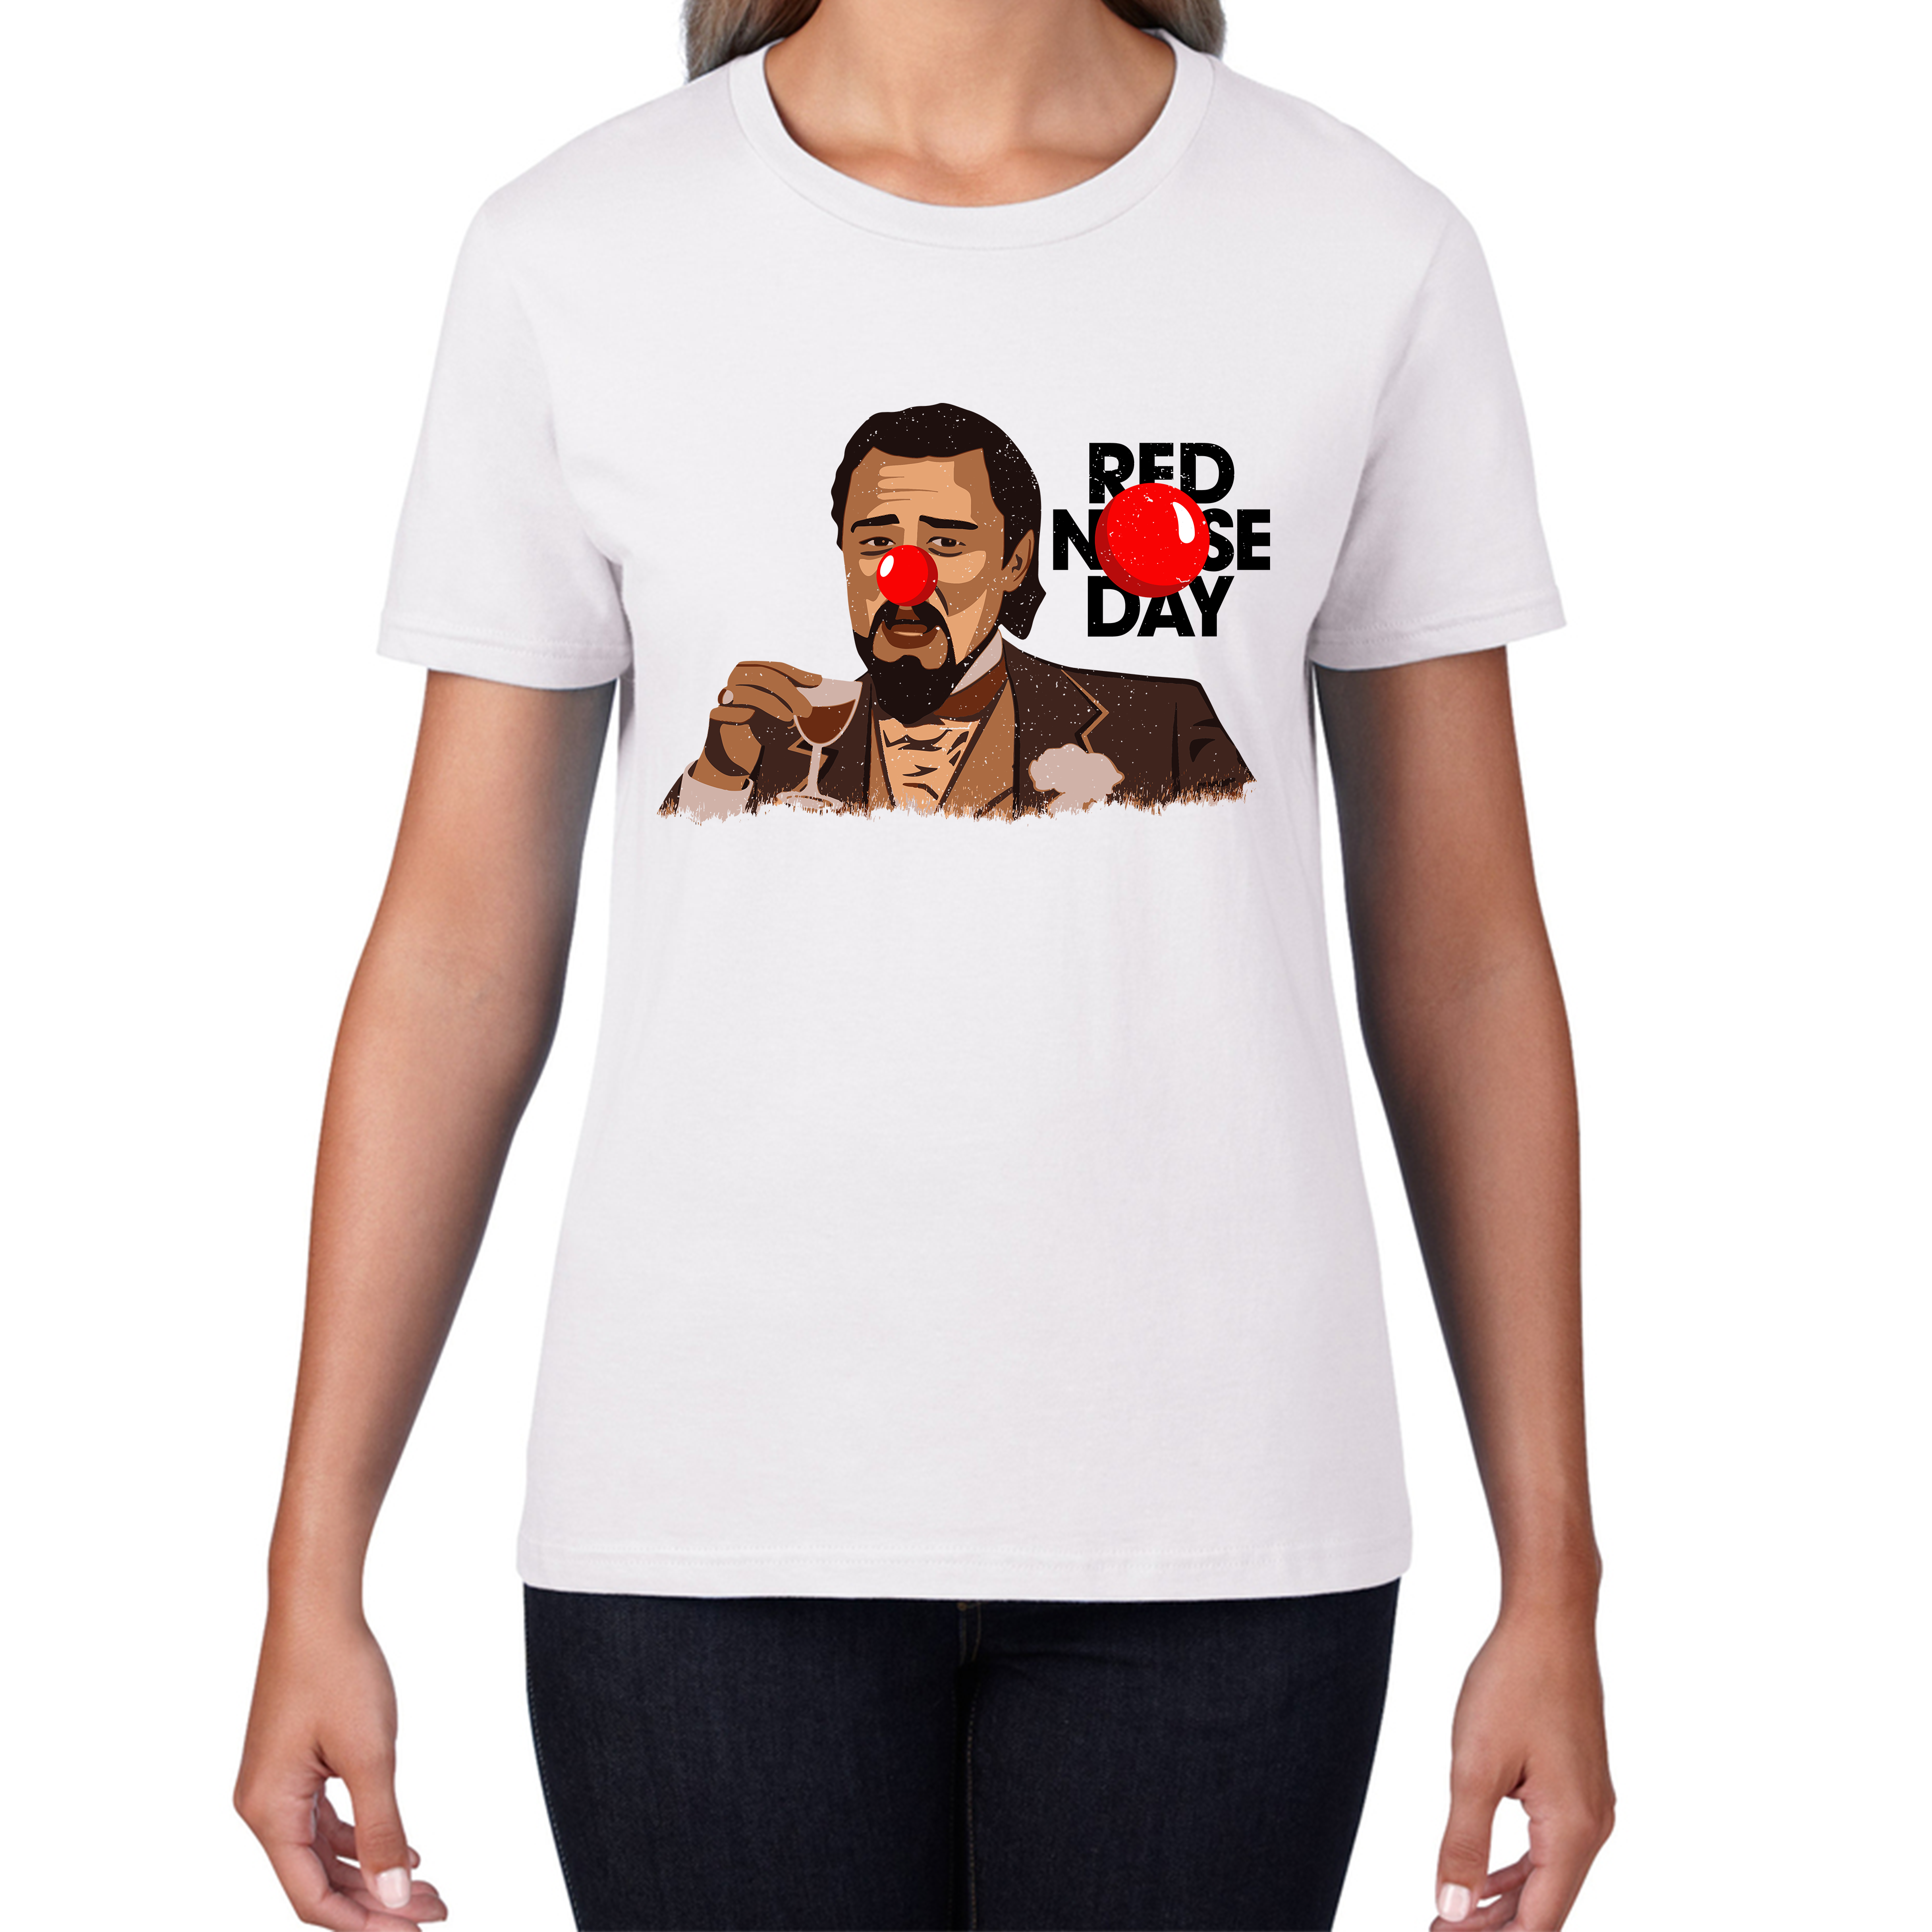 Leonardo Dicaprio Laughing Meme Red Nose Day Ladies T Shirt. 50% Goes To Charity